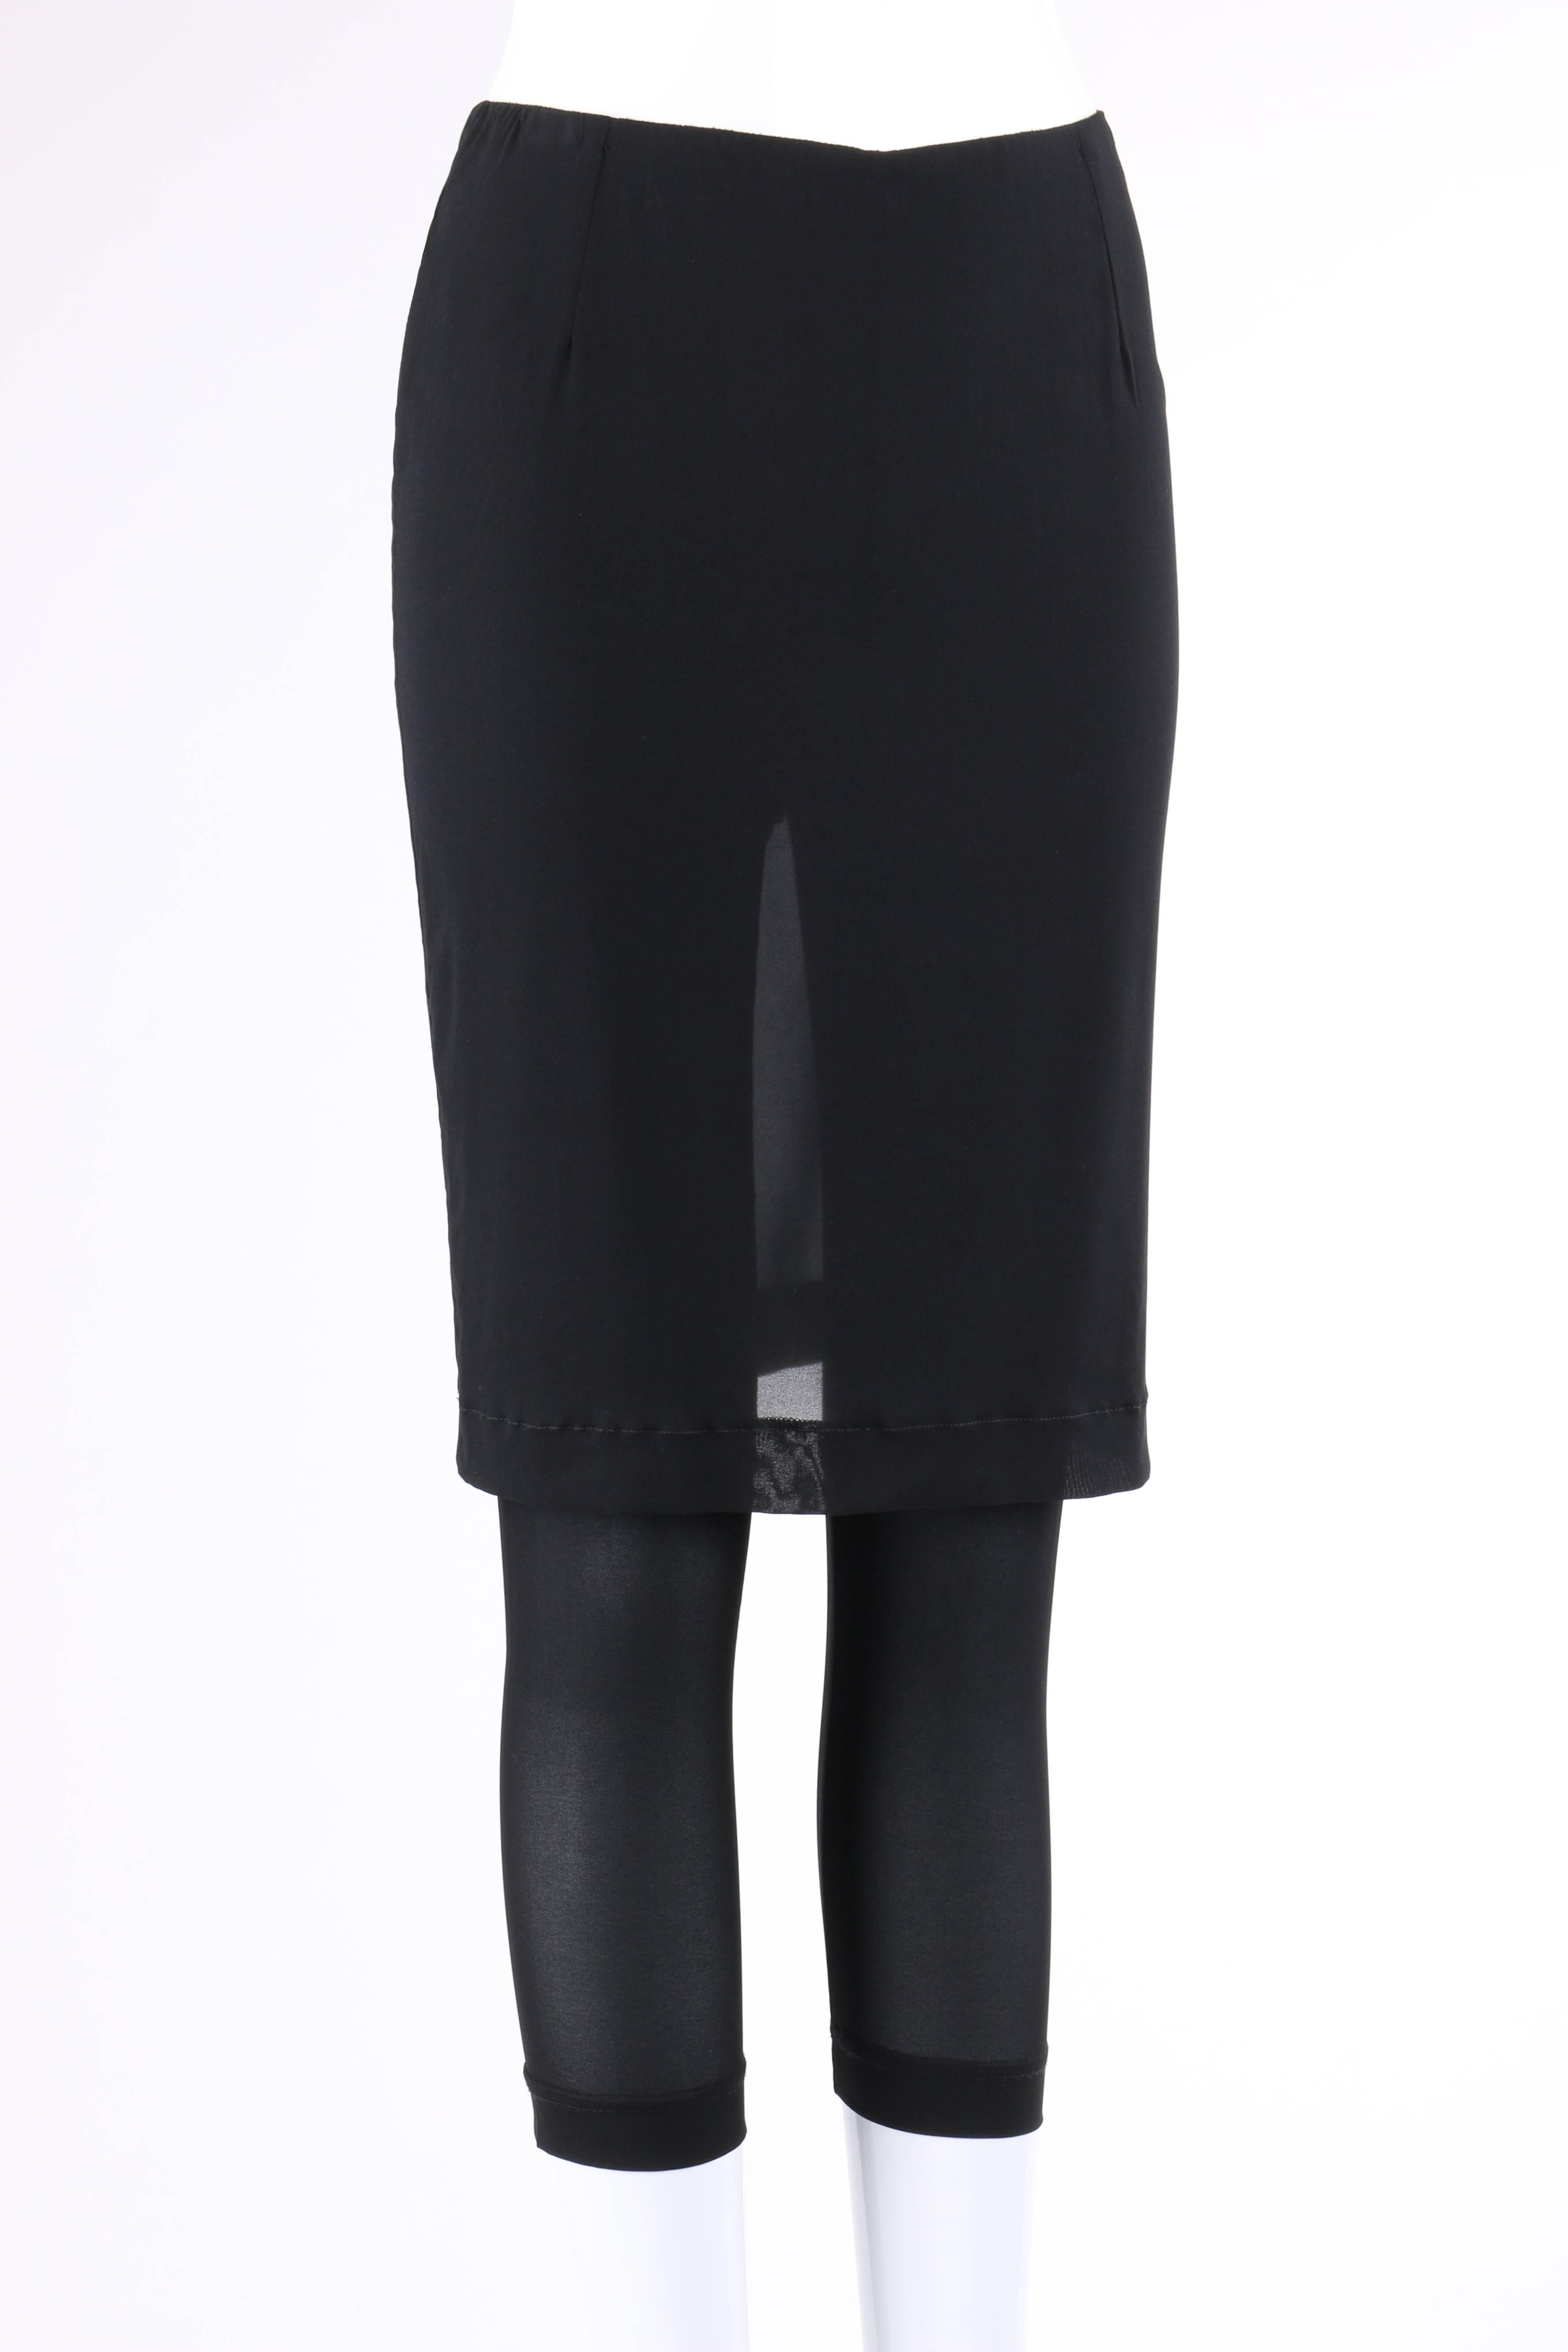 Dolce & Gabbana c.1990's black silk blend pencil skirt with attached leggings. Black pencil skirt overlay. Waist seam darts at front and back. Attached cropped leggings. Center back invisible zipper with hook and eye closure at top. Black grosgrain